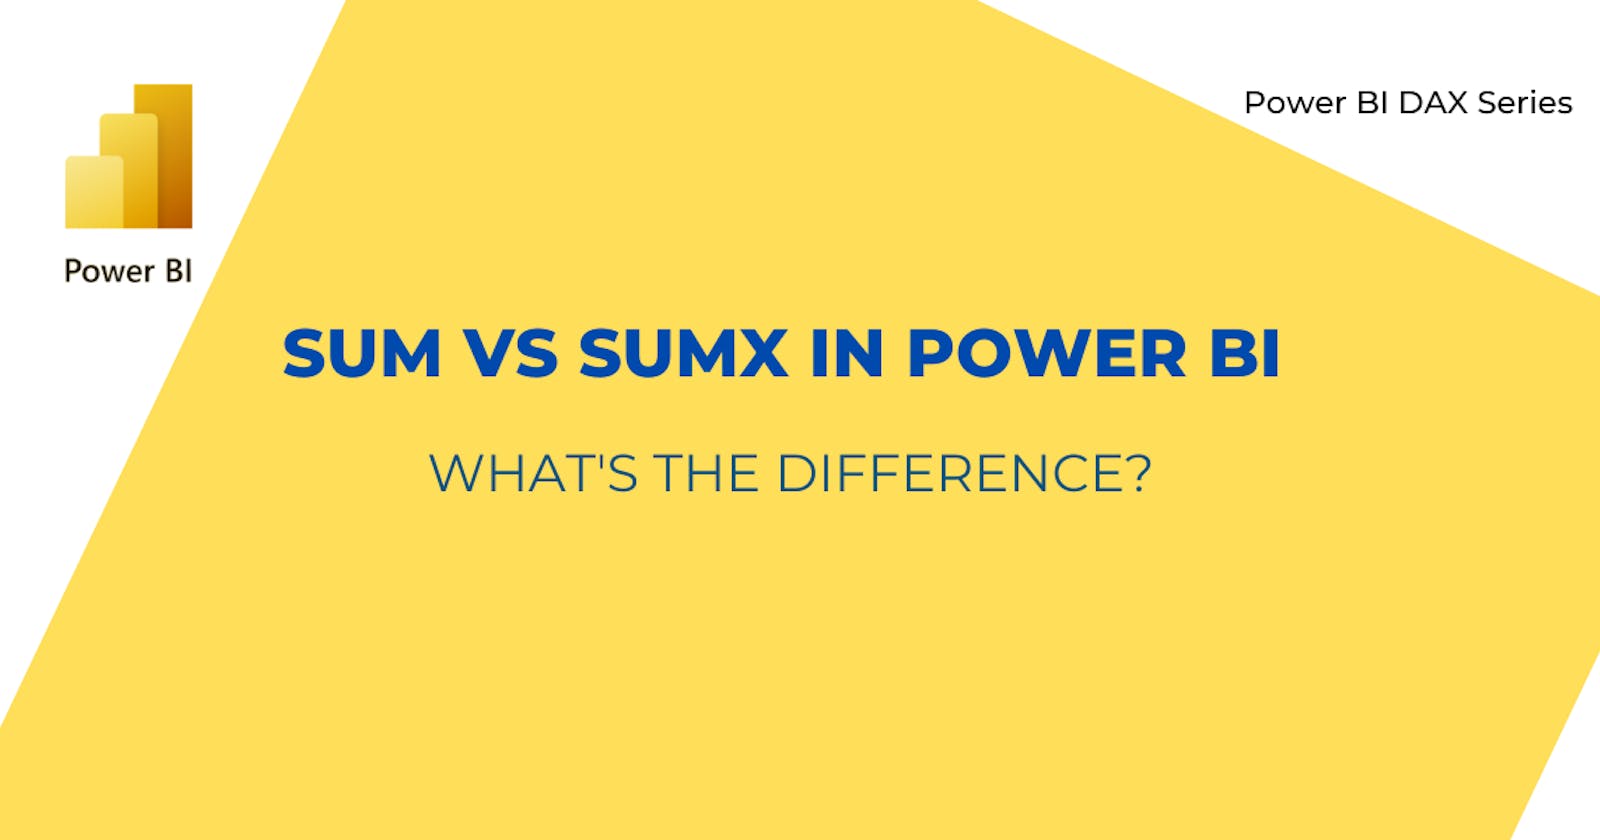 SUM vs SUMX in Power BI: What's the difference?